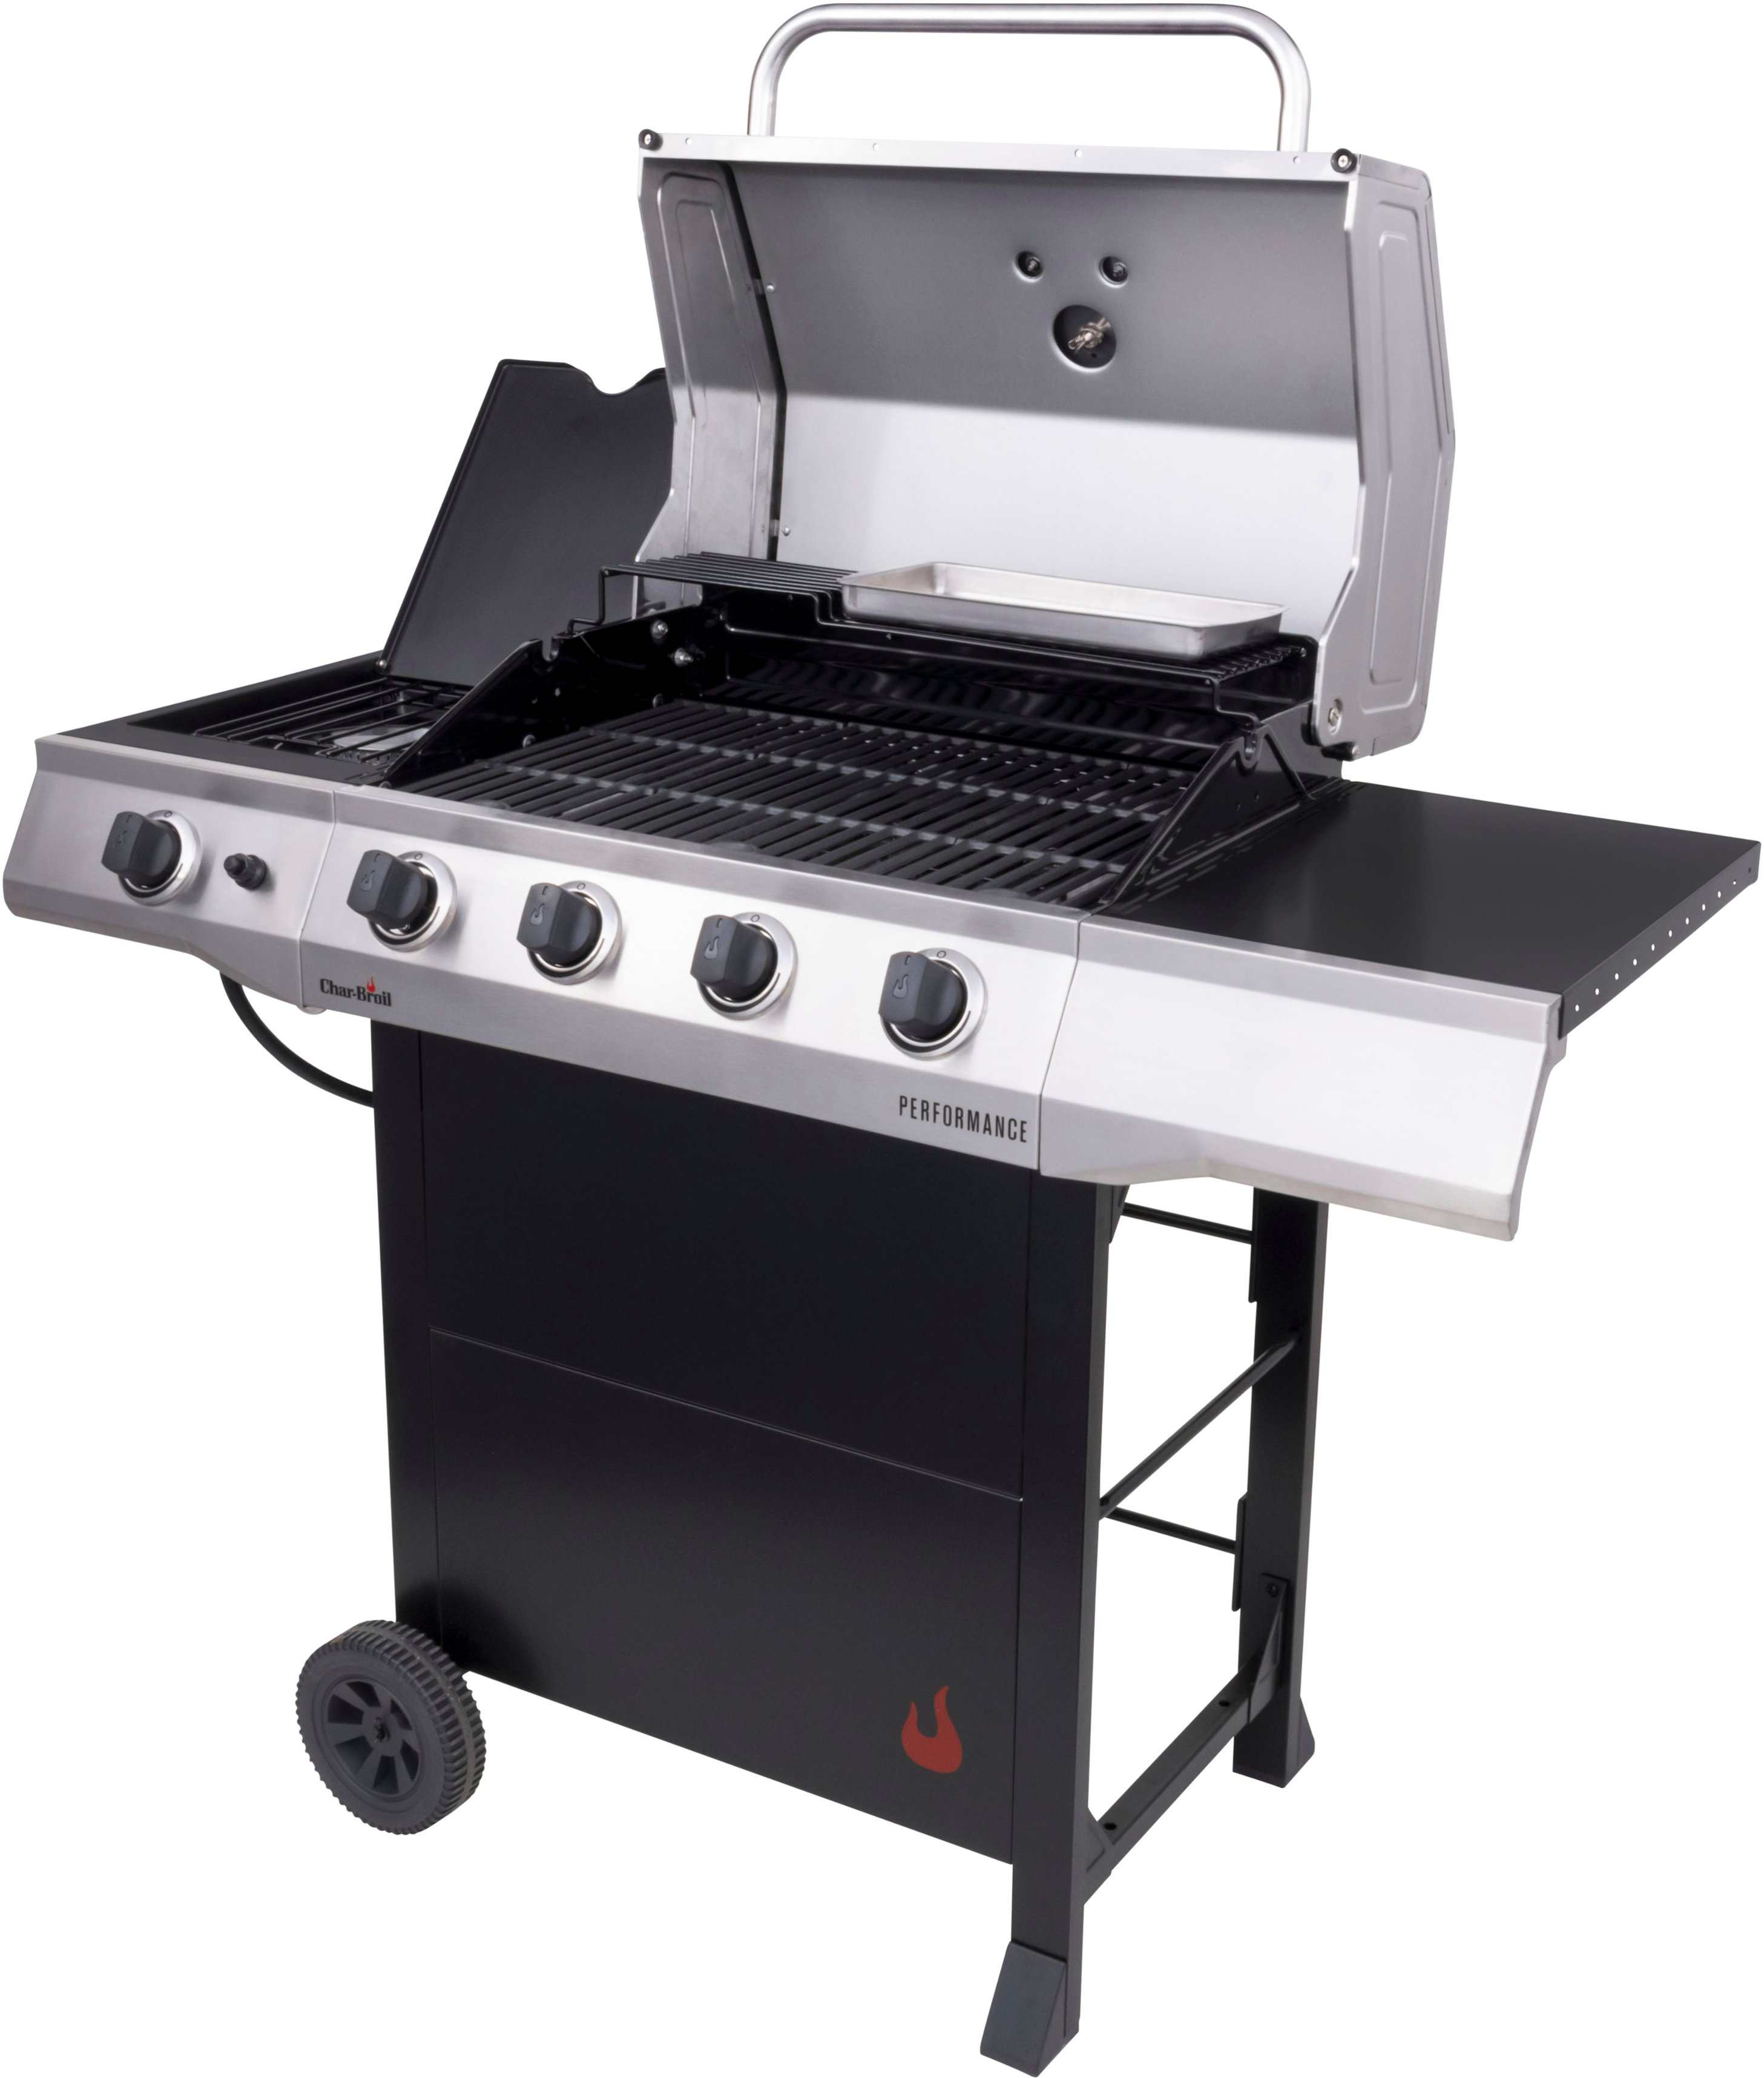 Char-Broil Performance Series Gas Grill Steel and Black 463351021 - Buy